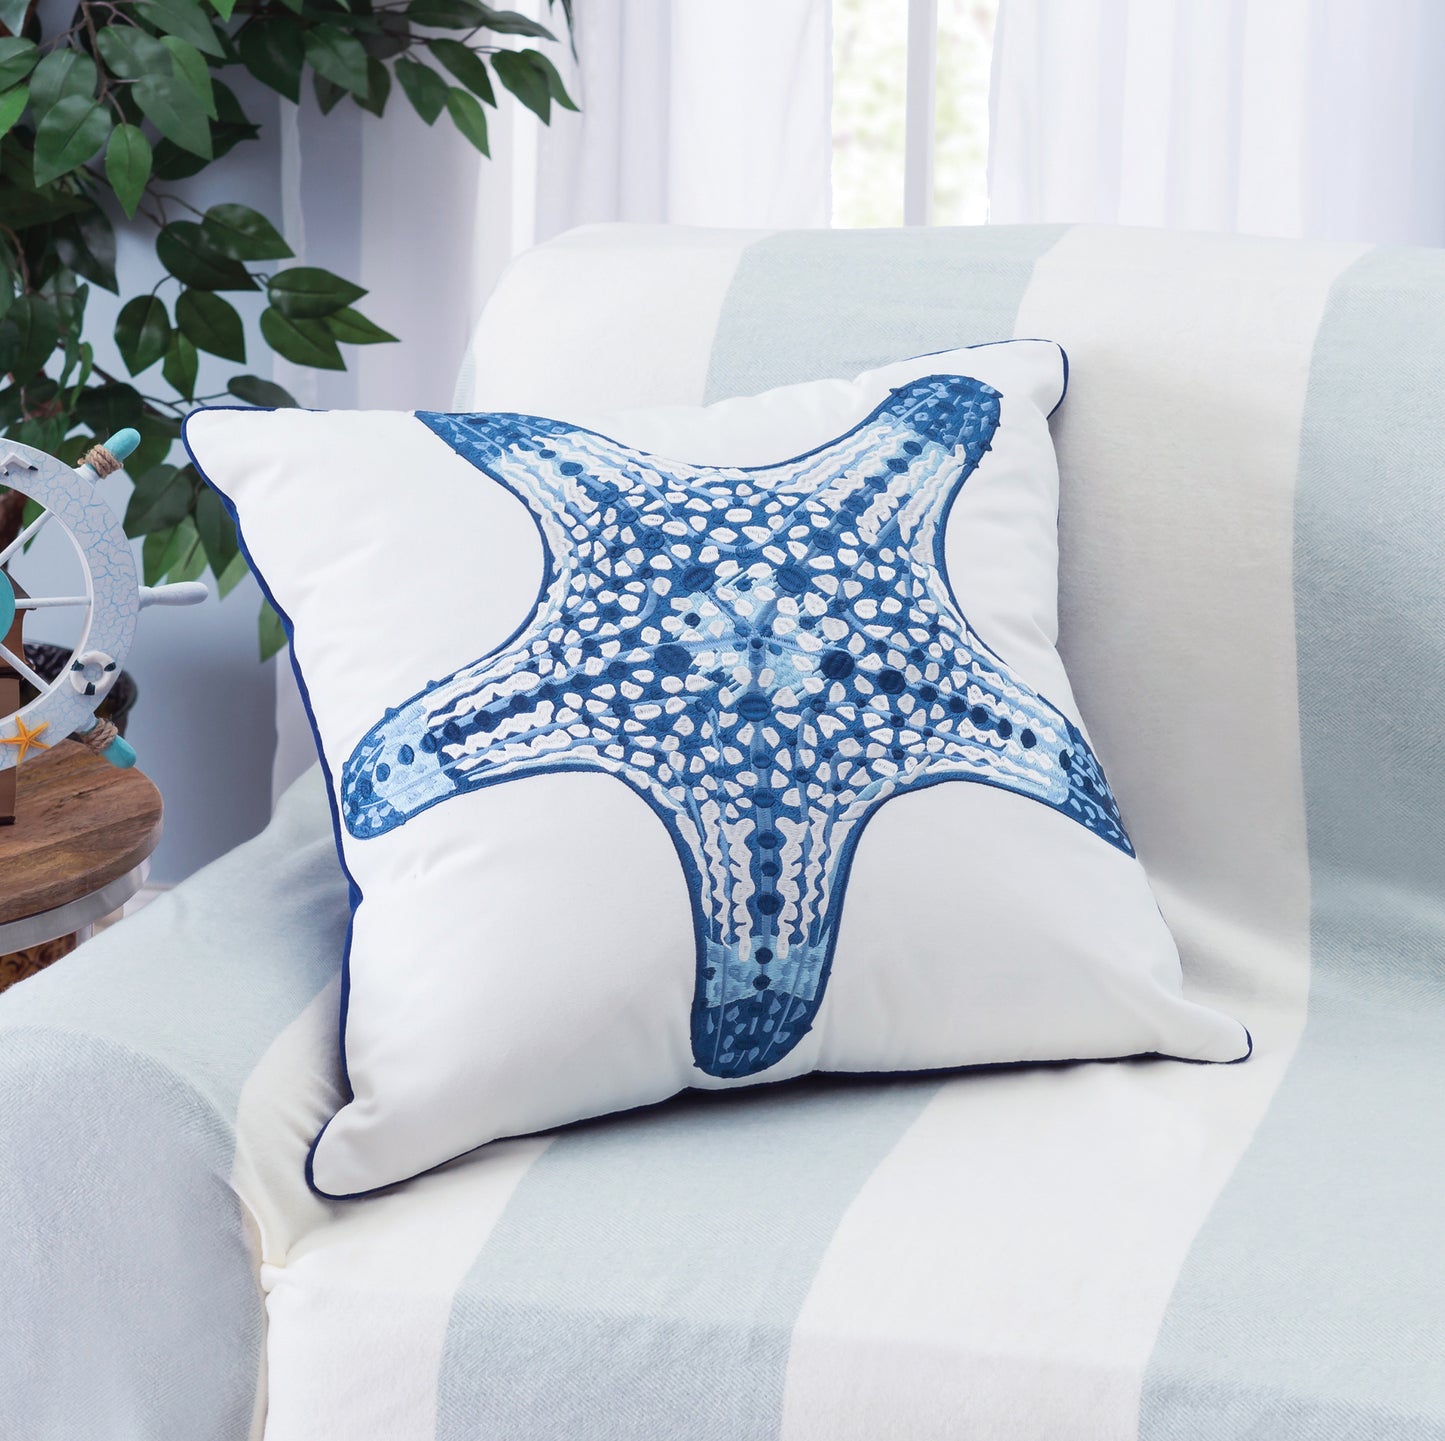 Blue Sea Star pillow styled in a coastal themed living room.